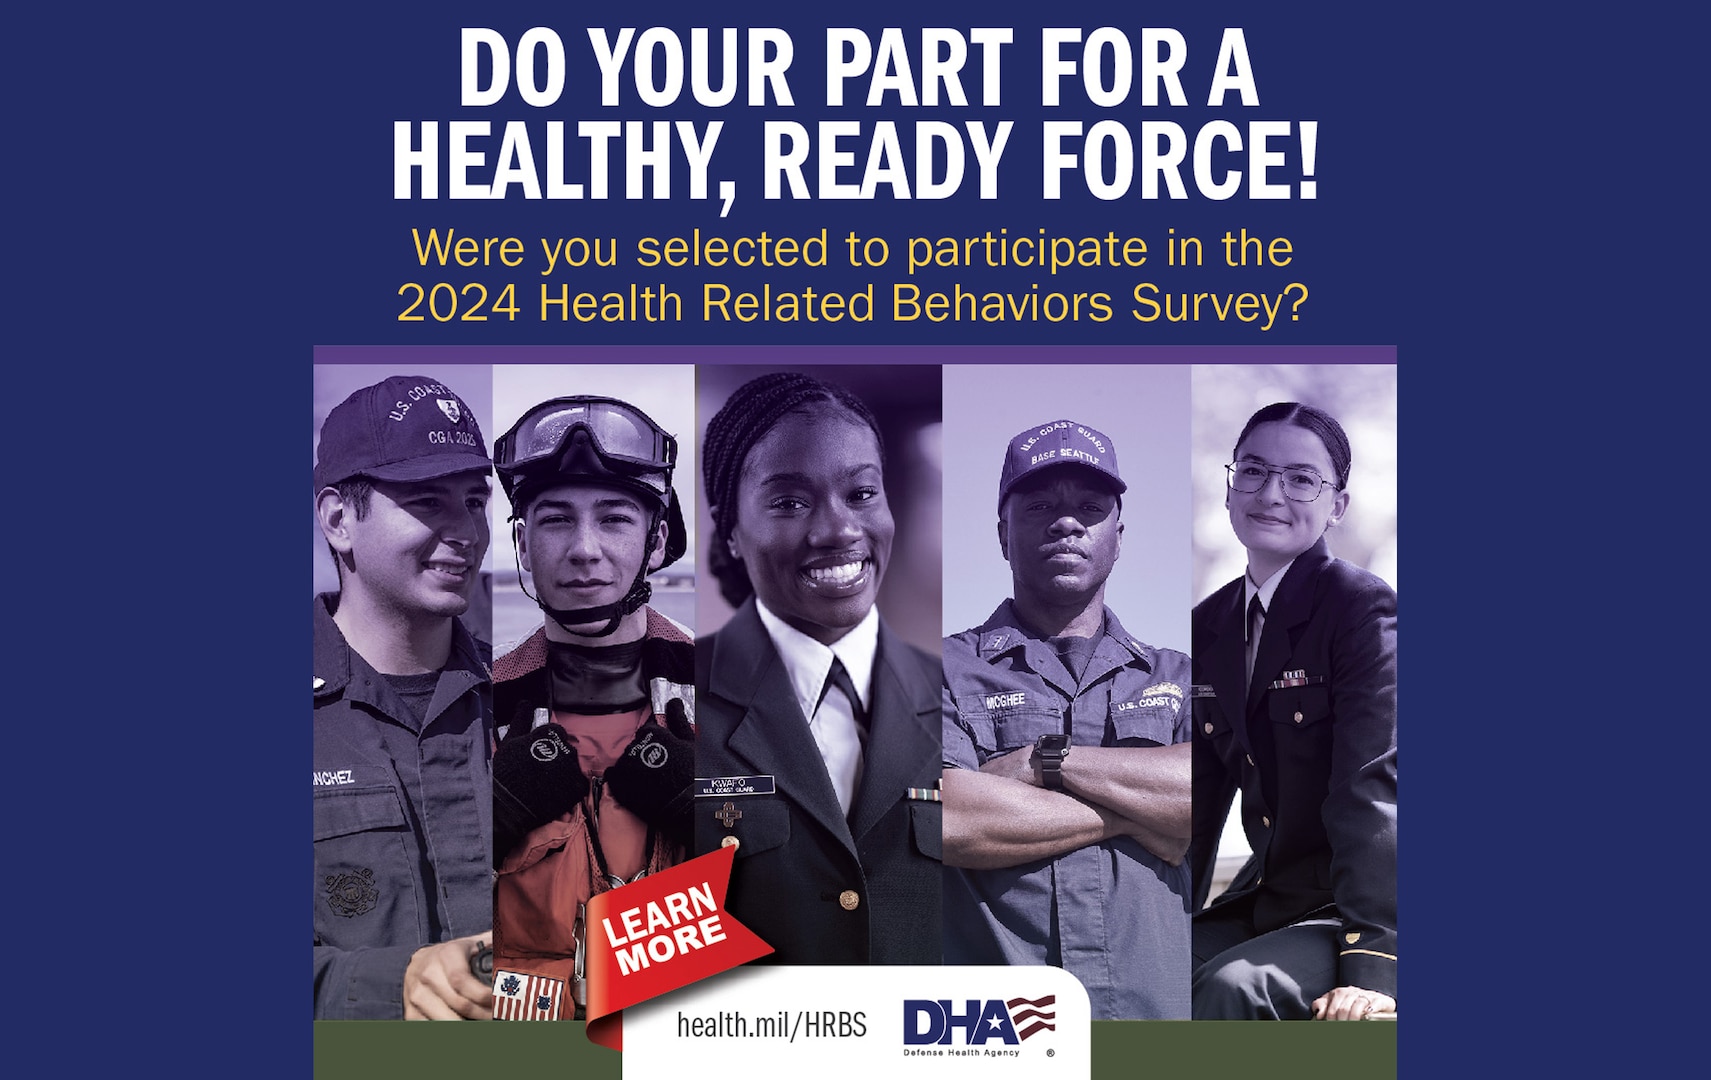 The Coast Guard, Department of Defense, launch the Health Related Behaviors Survey seeking your candid input.